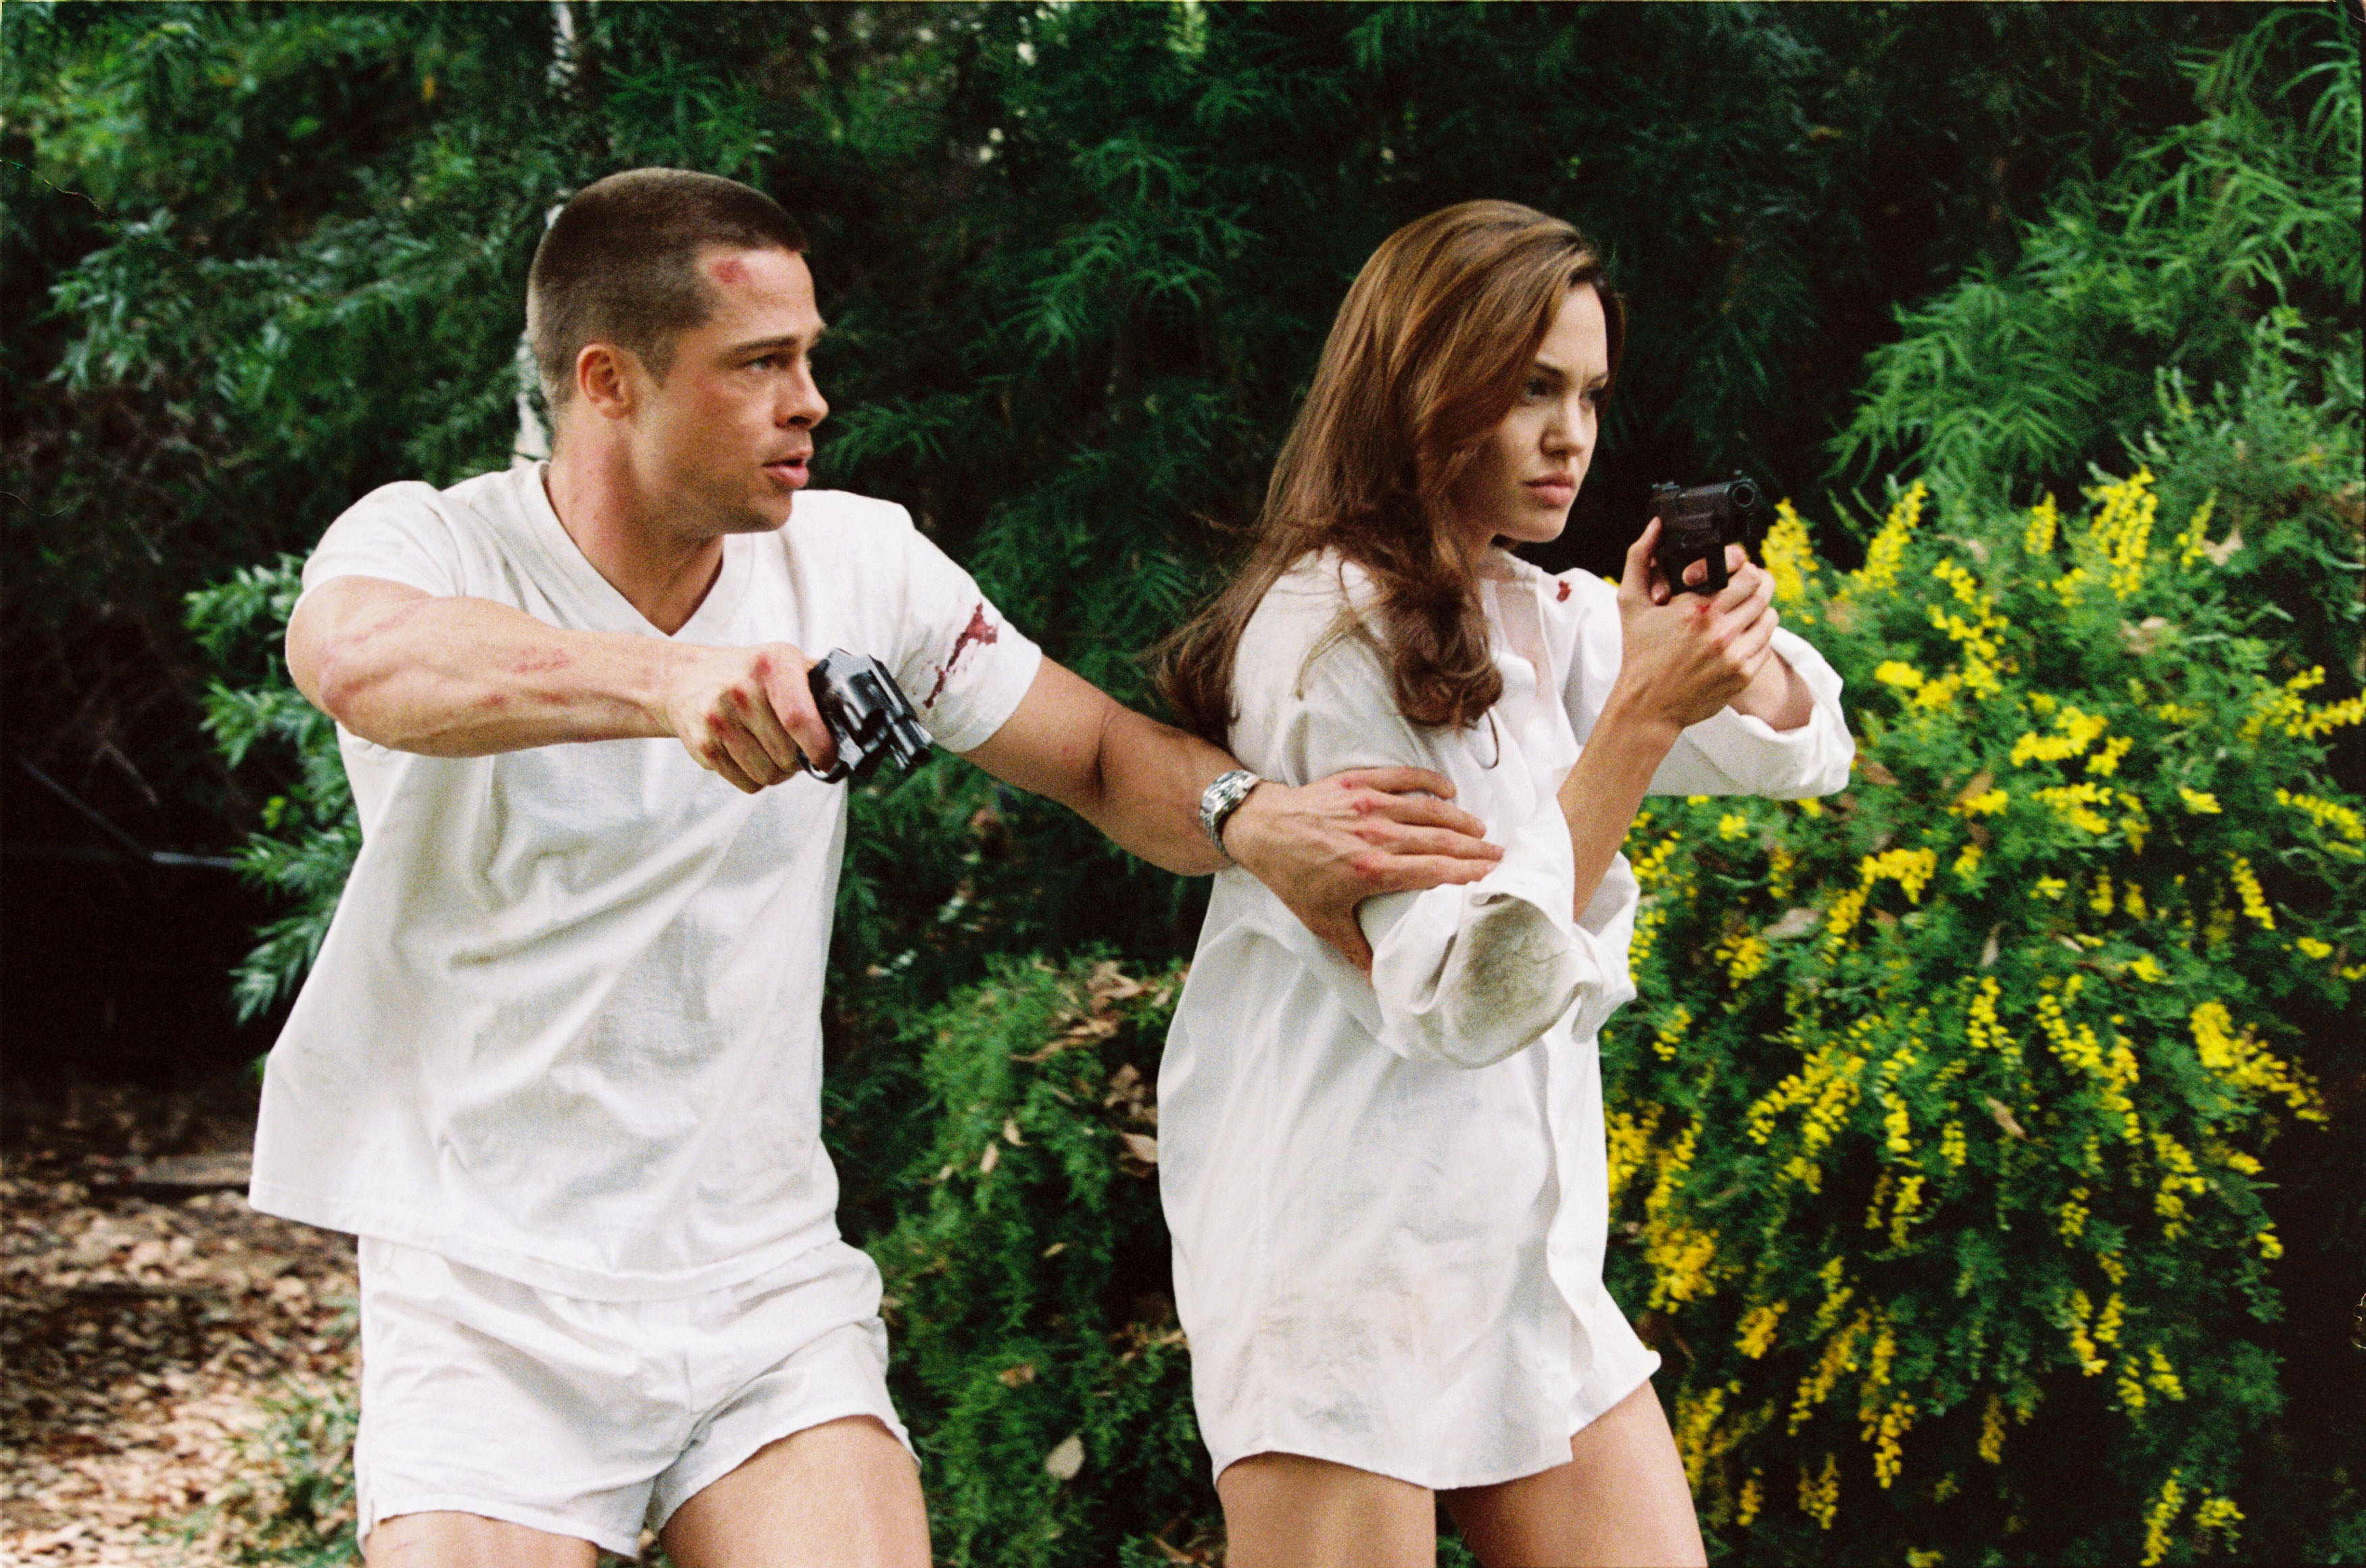 Brad Pitt and Angelina Jolie as an assassin couple in ‘Mr & Mrs Smith’